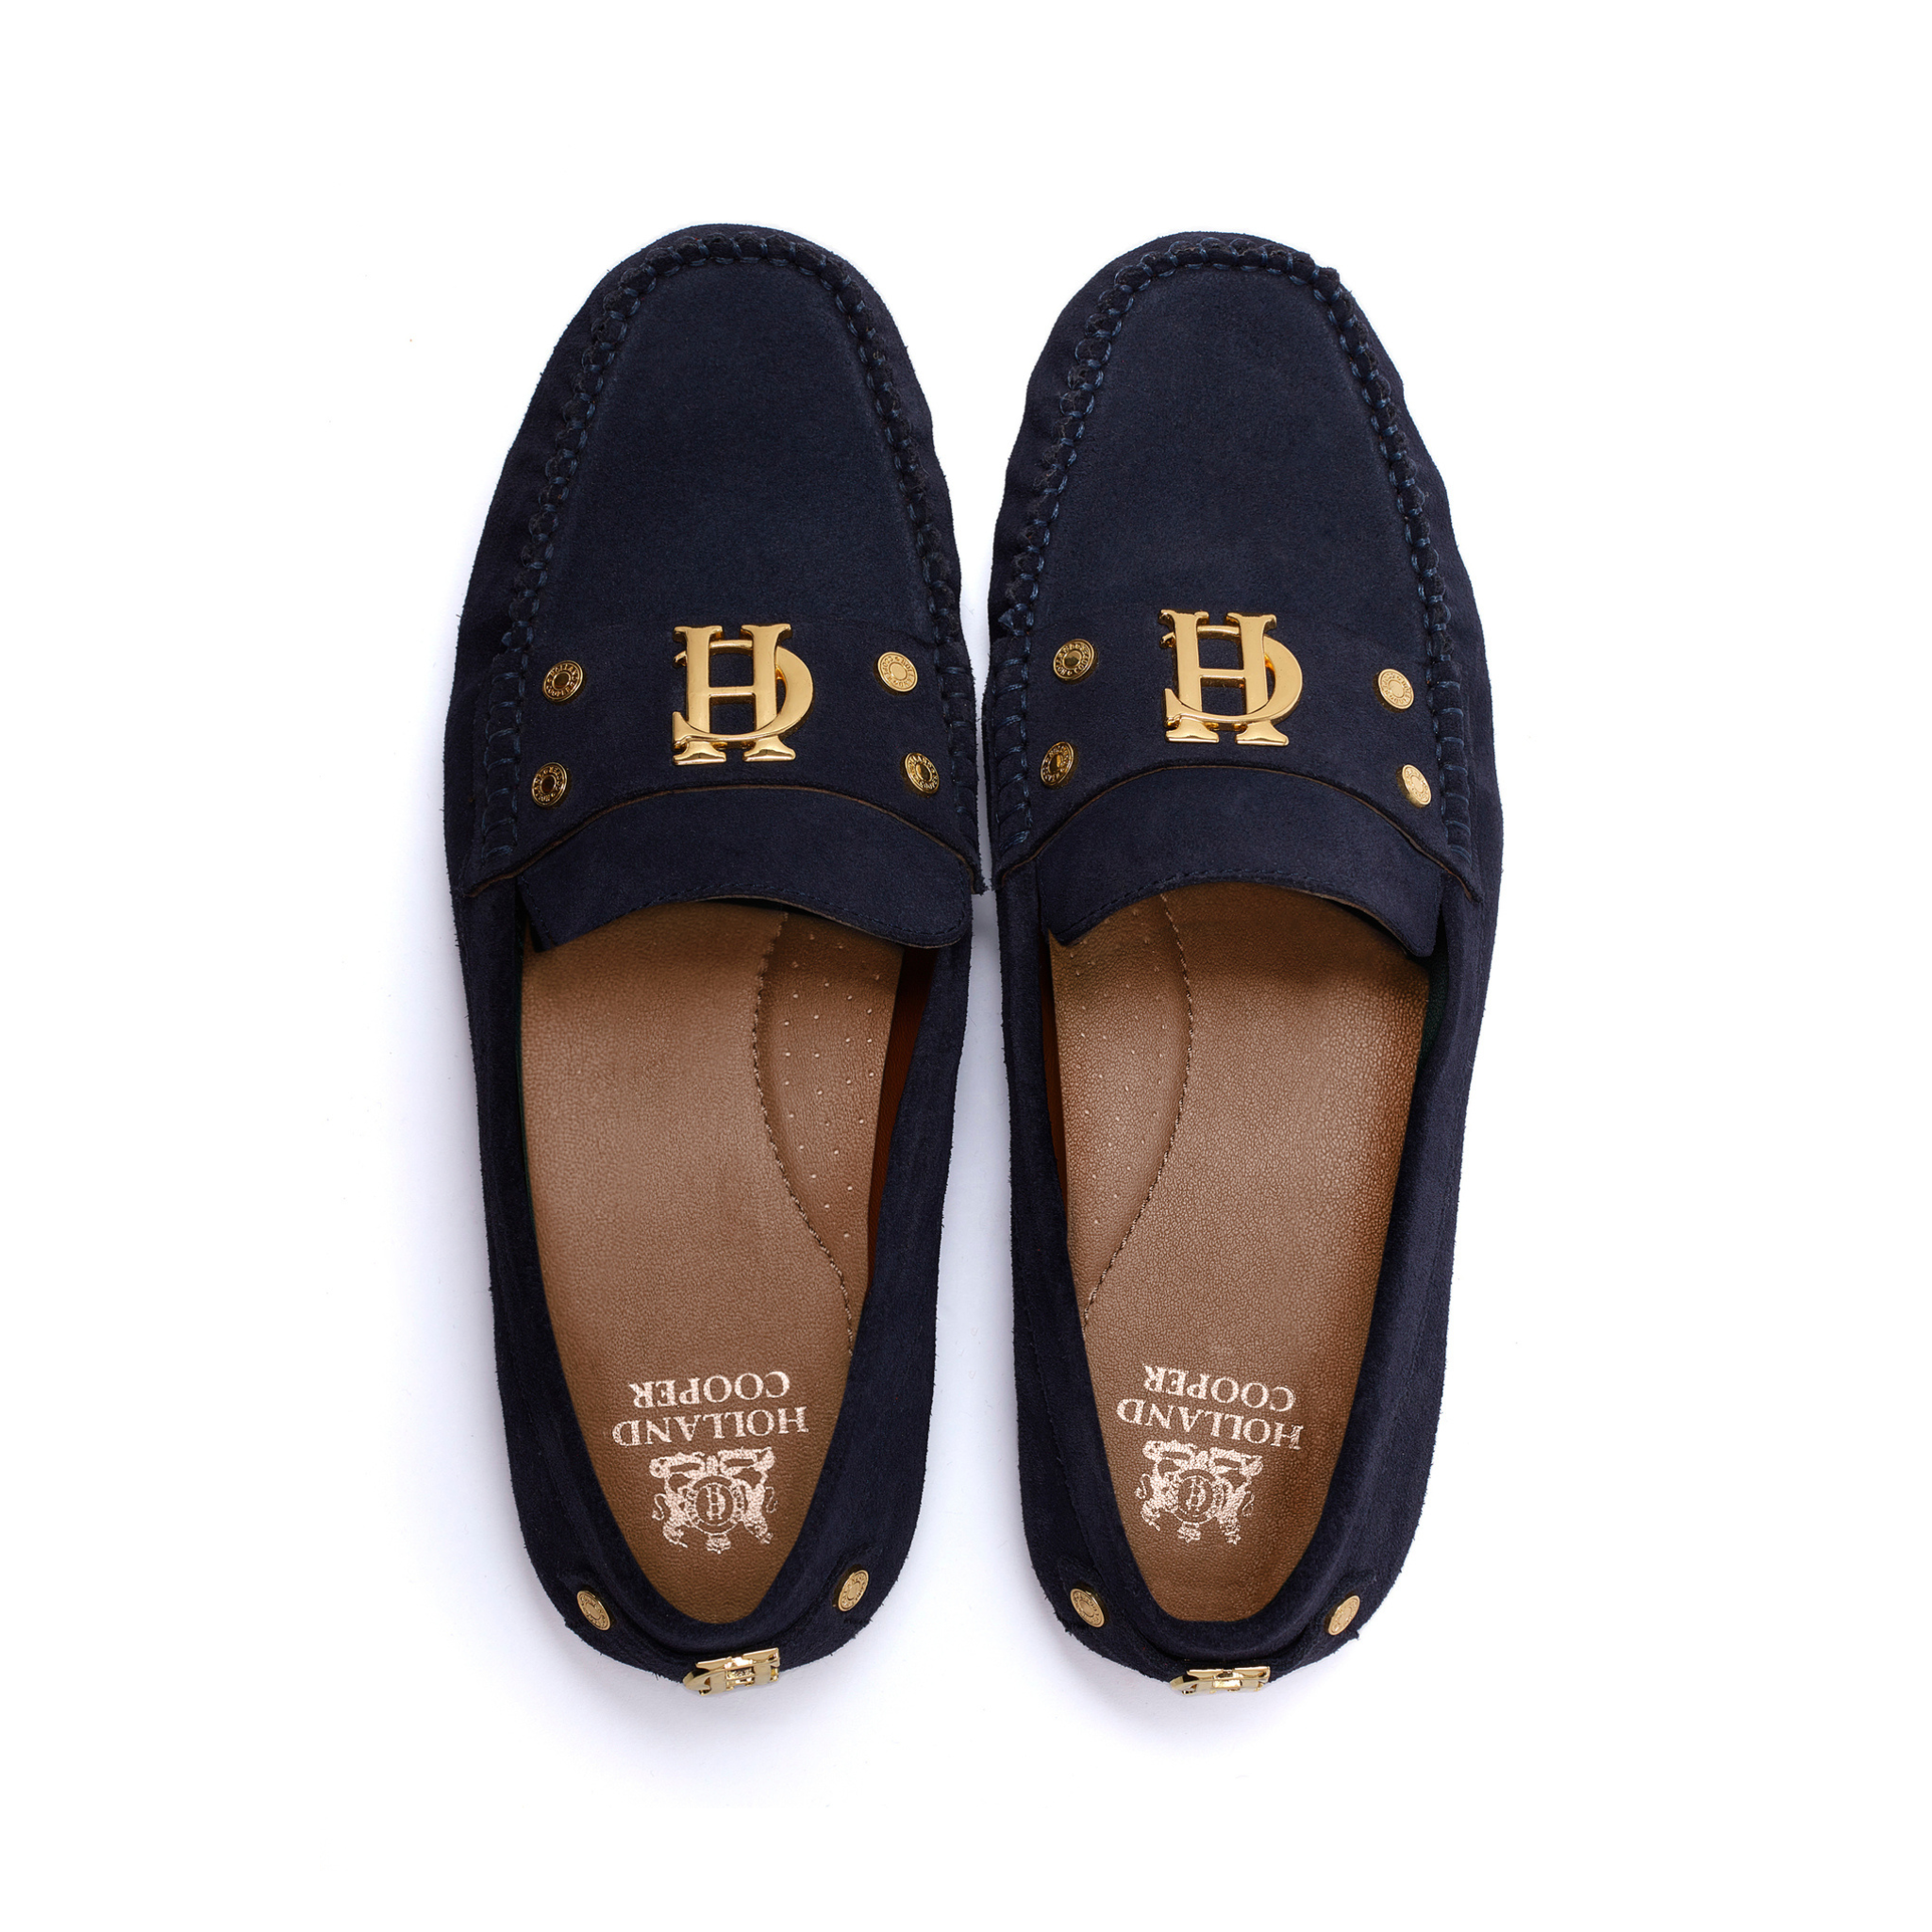 The Driving Loafer Ink Navy Suede